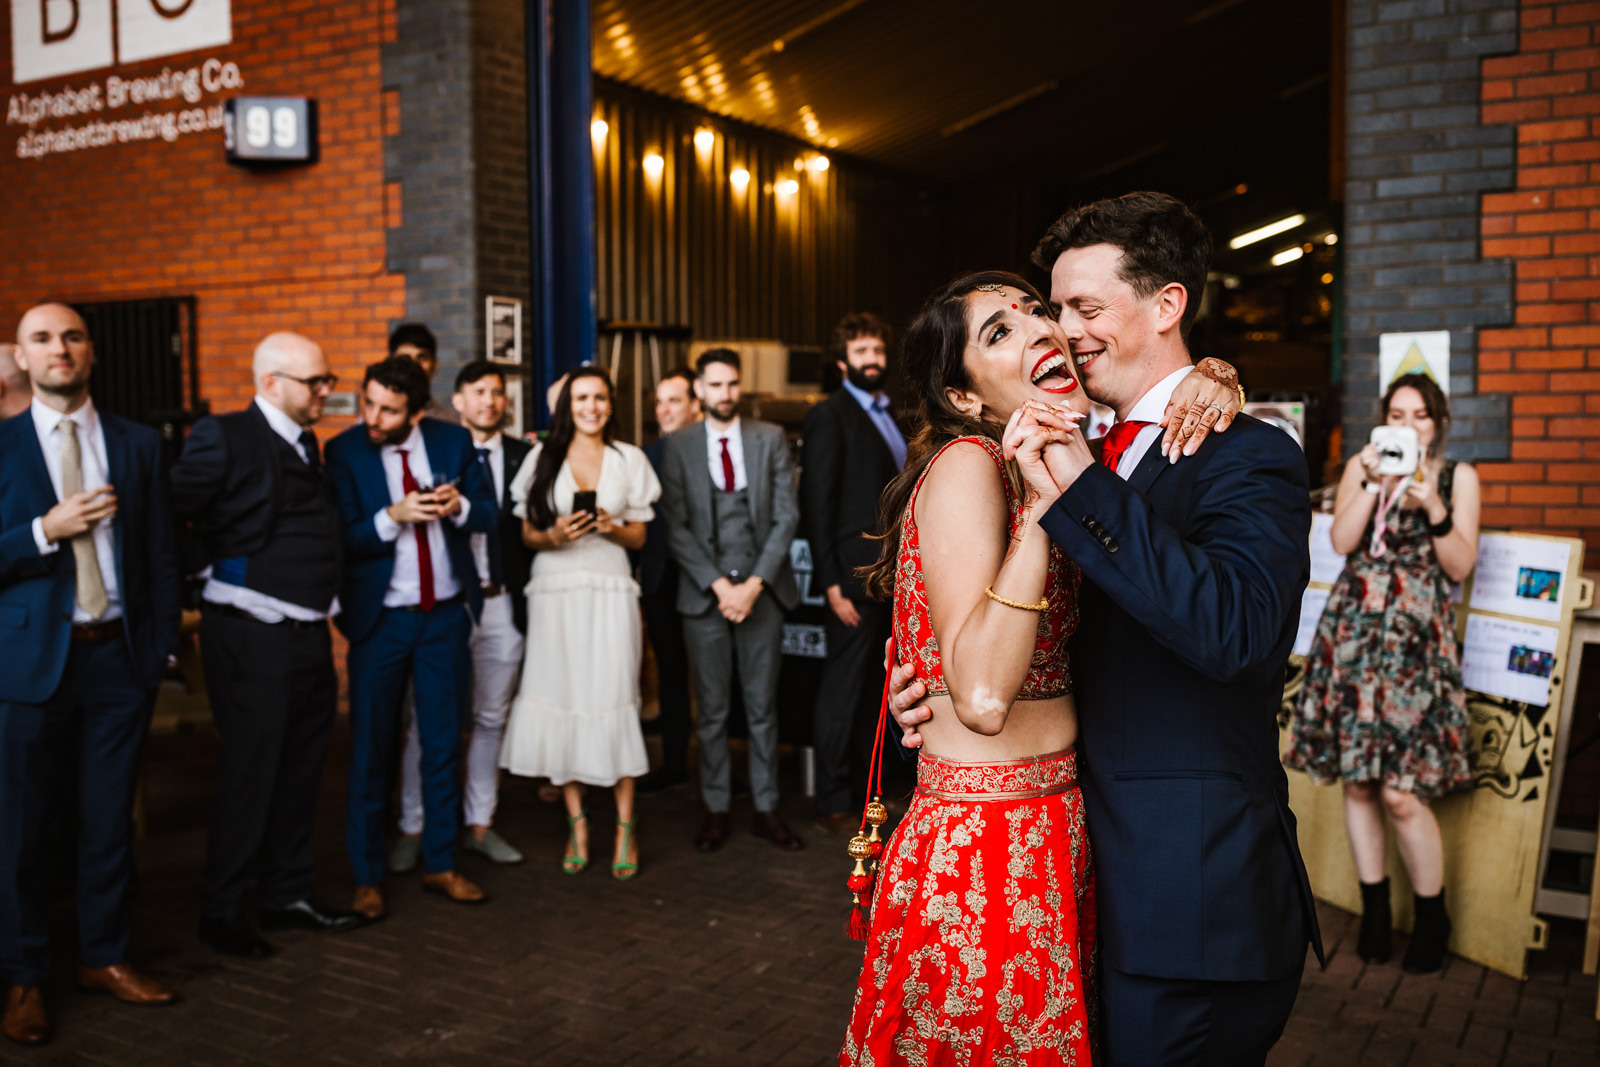 First dance at Alphabet brewing company